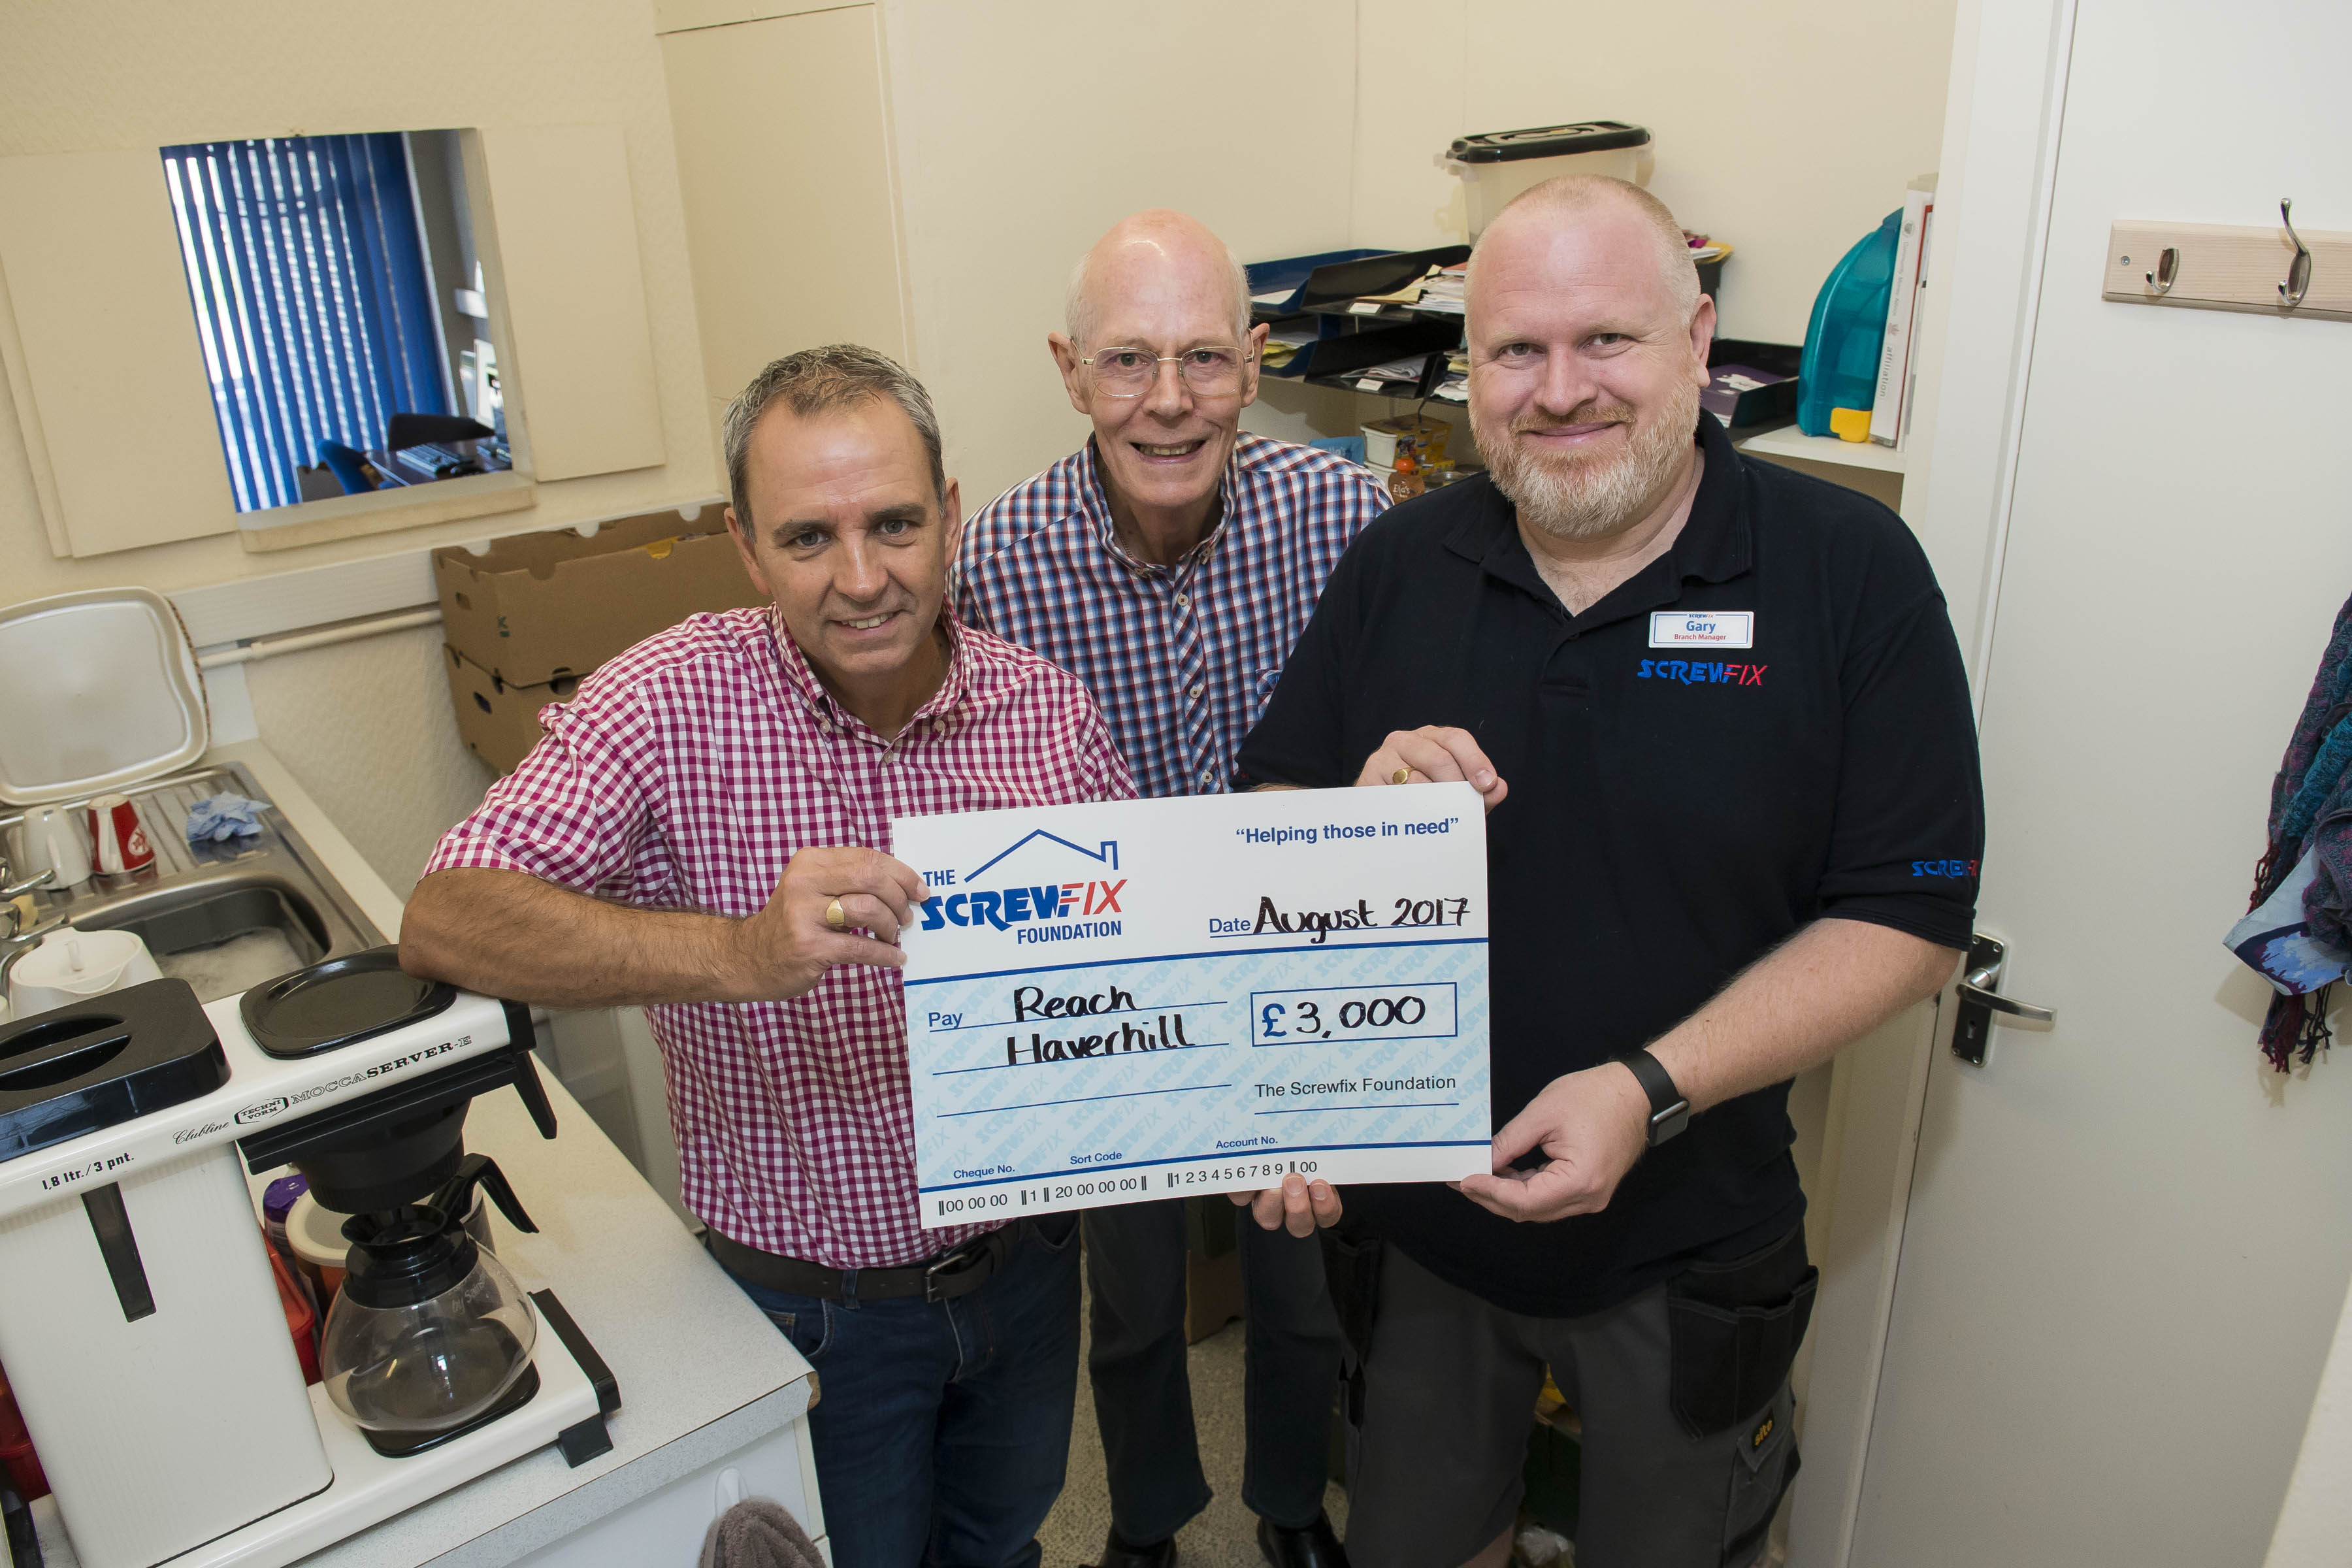 Reach Haverhill receives generous donation from The Screwfix Foundation